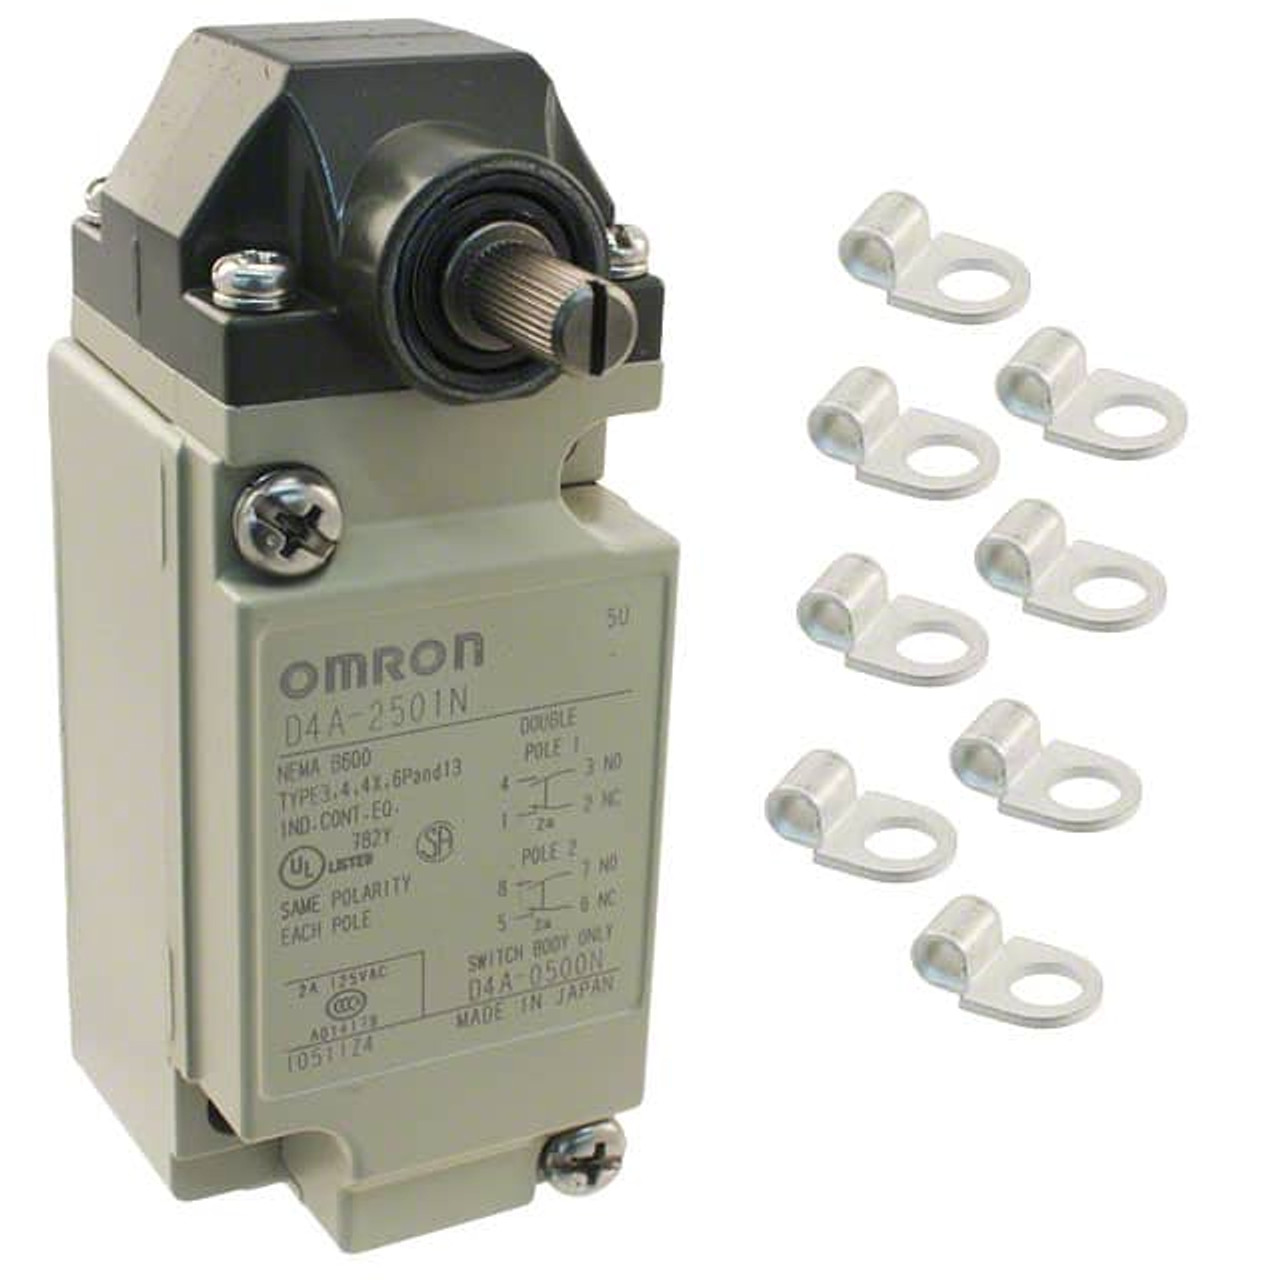 Omron D4A-2501N Limit Switches